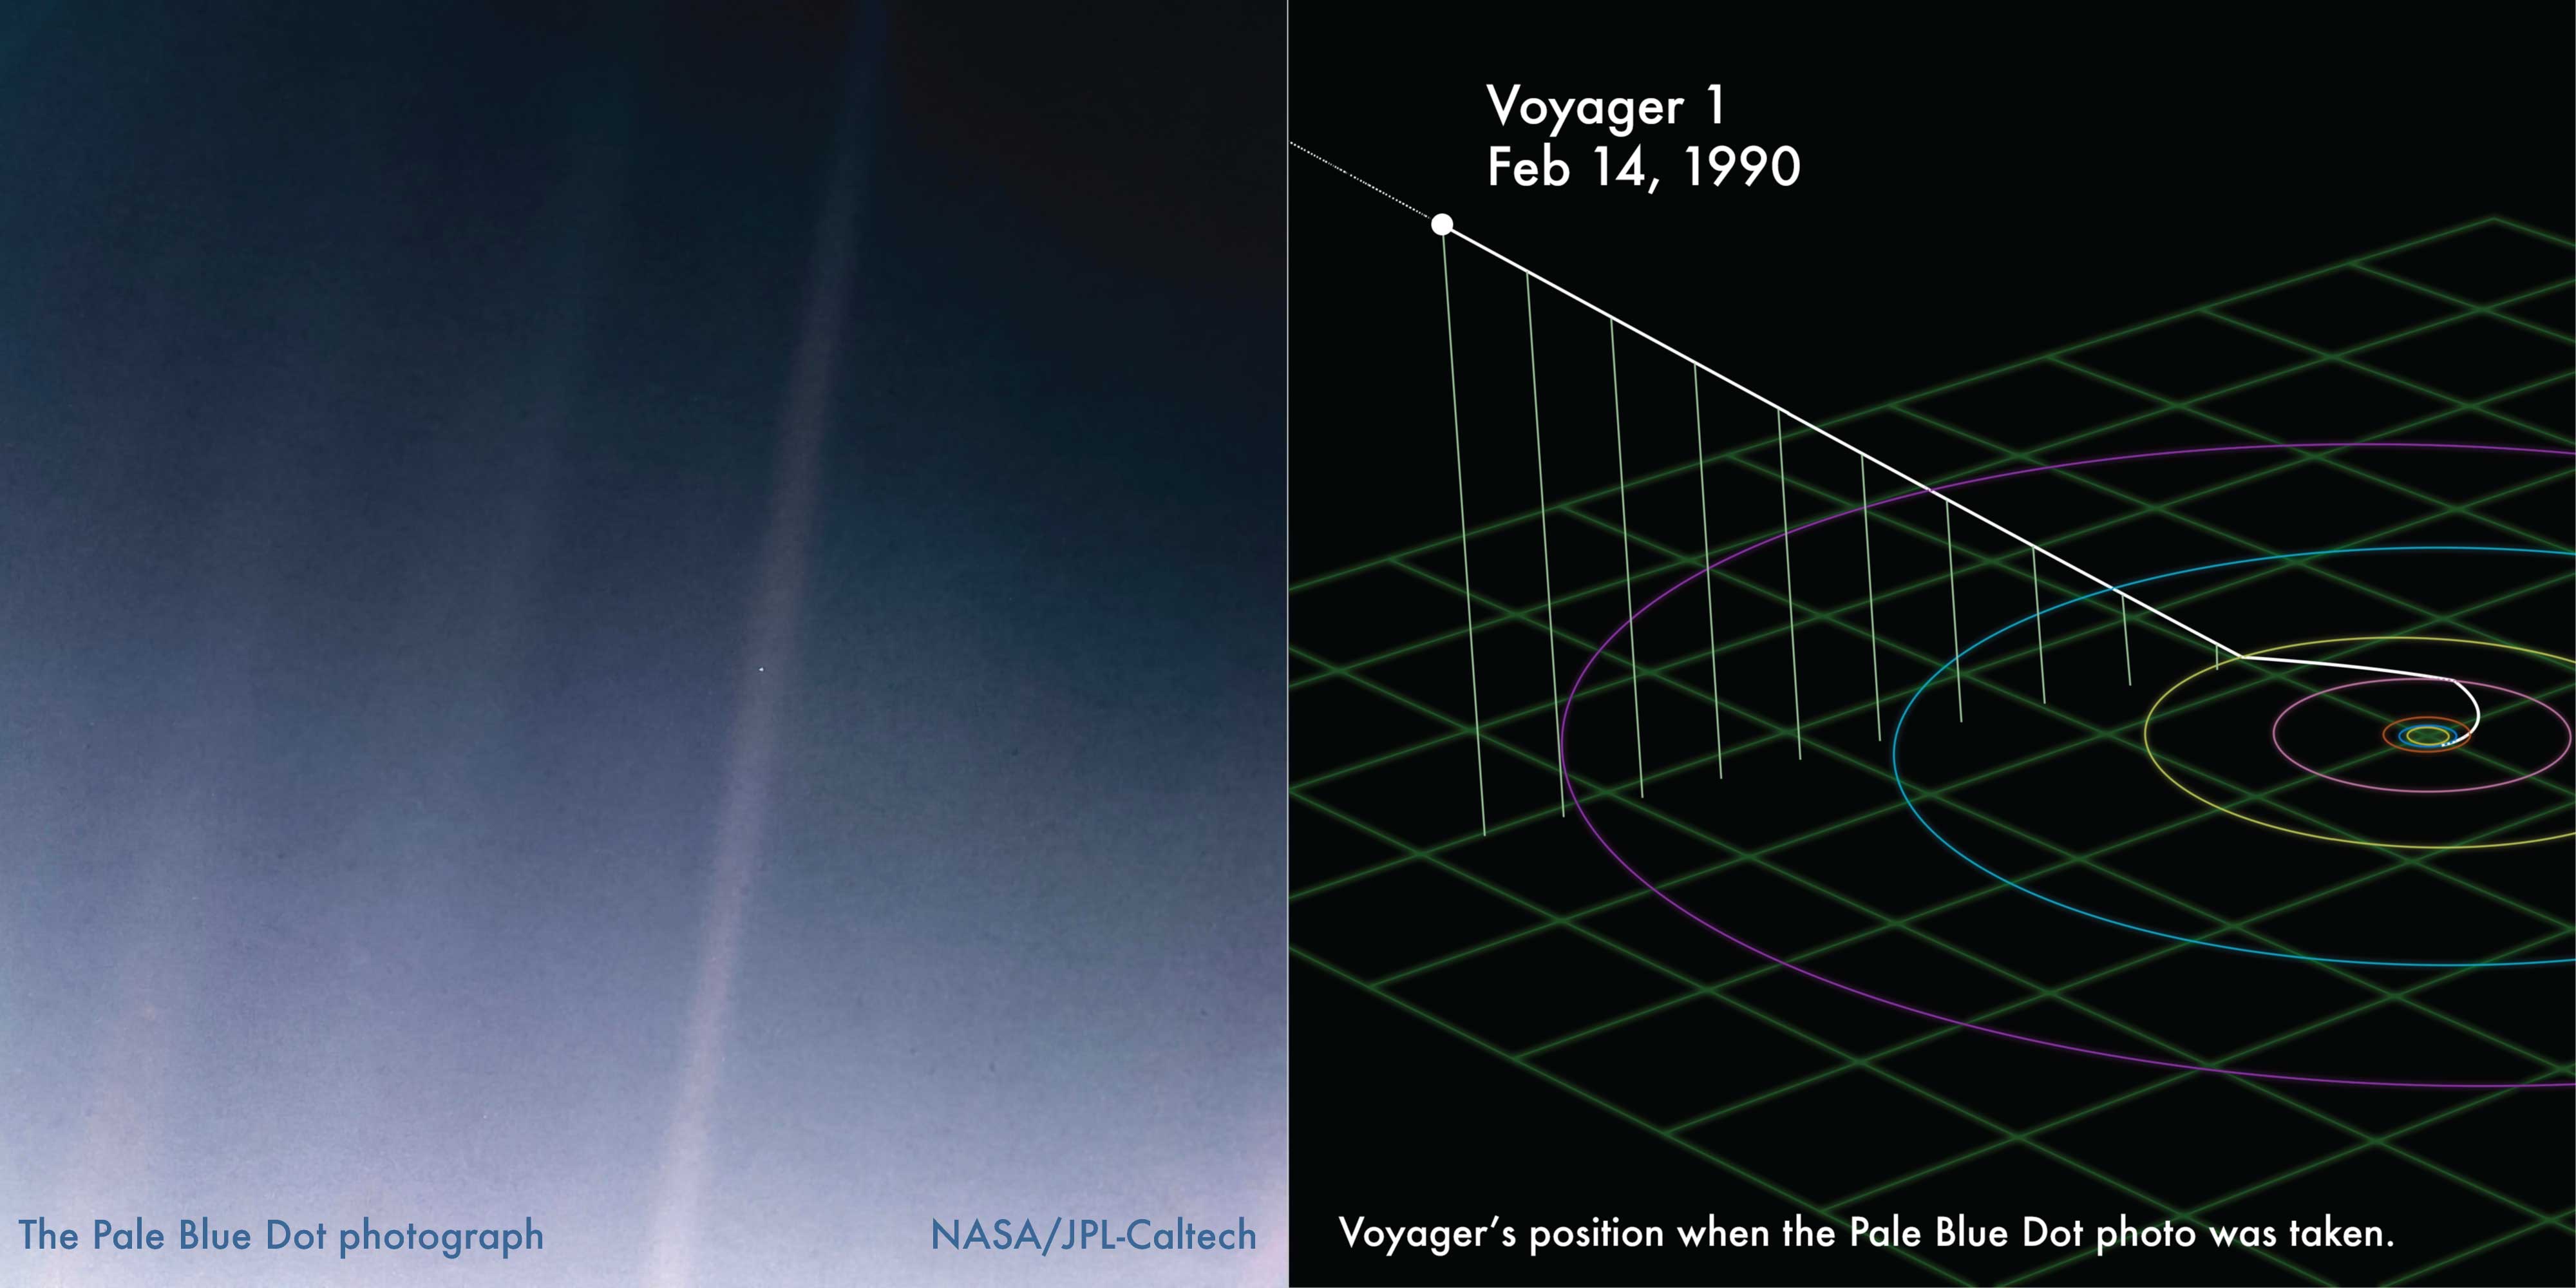 The pale blue dot - image and position schematic